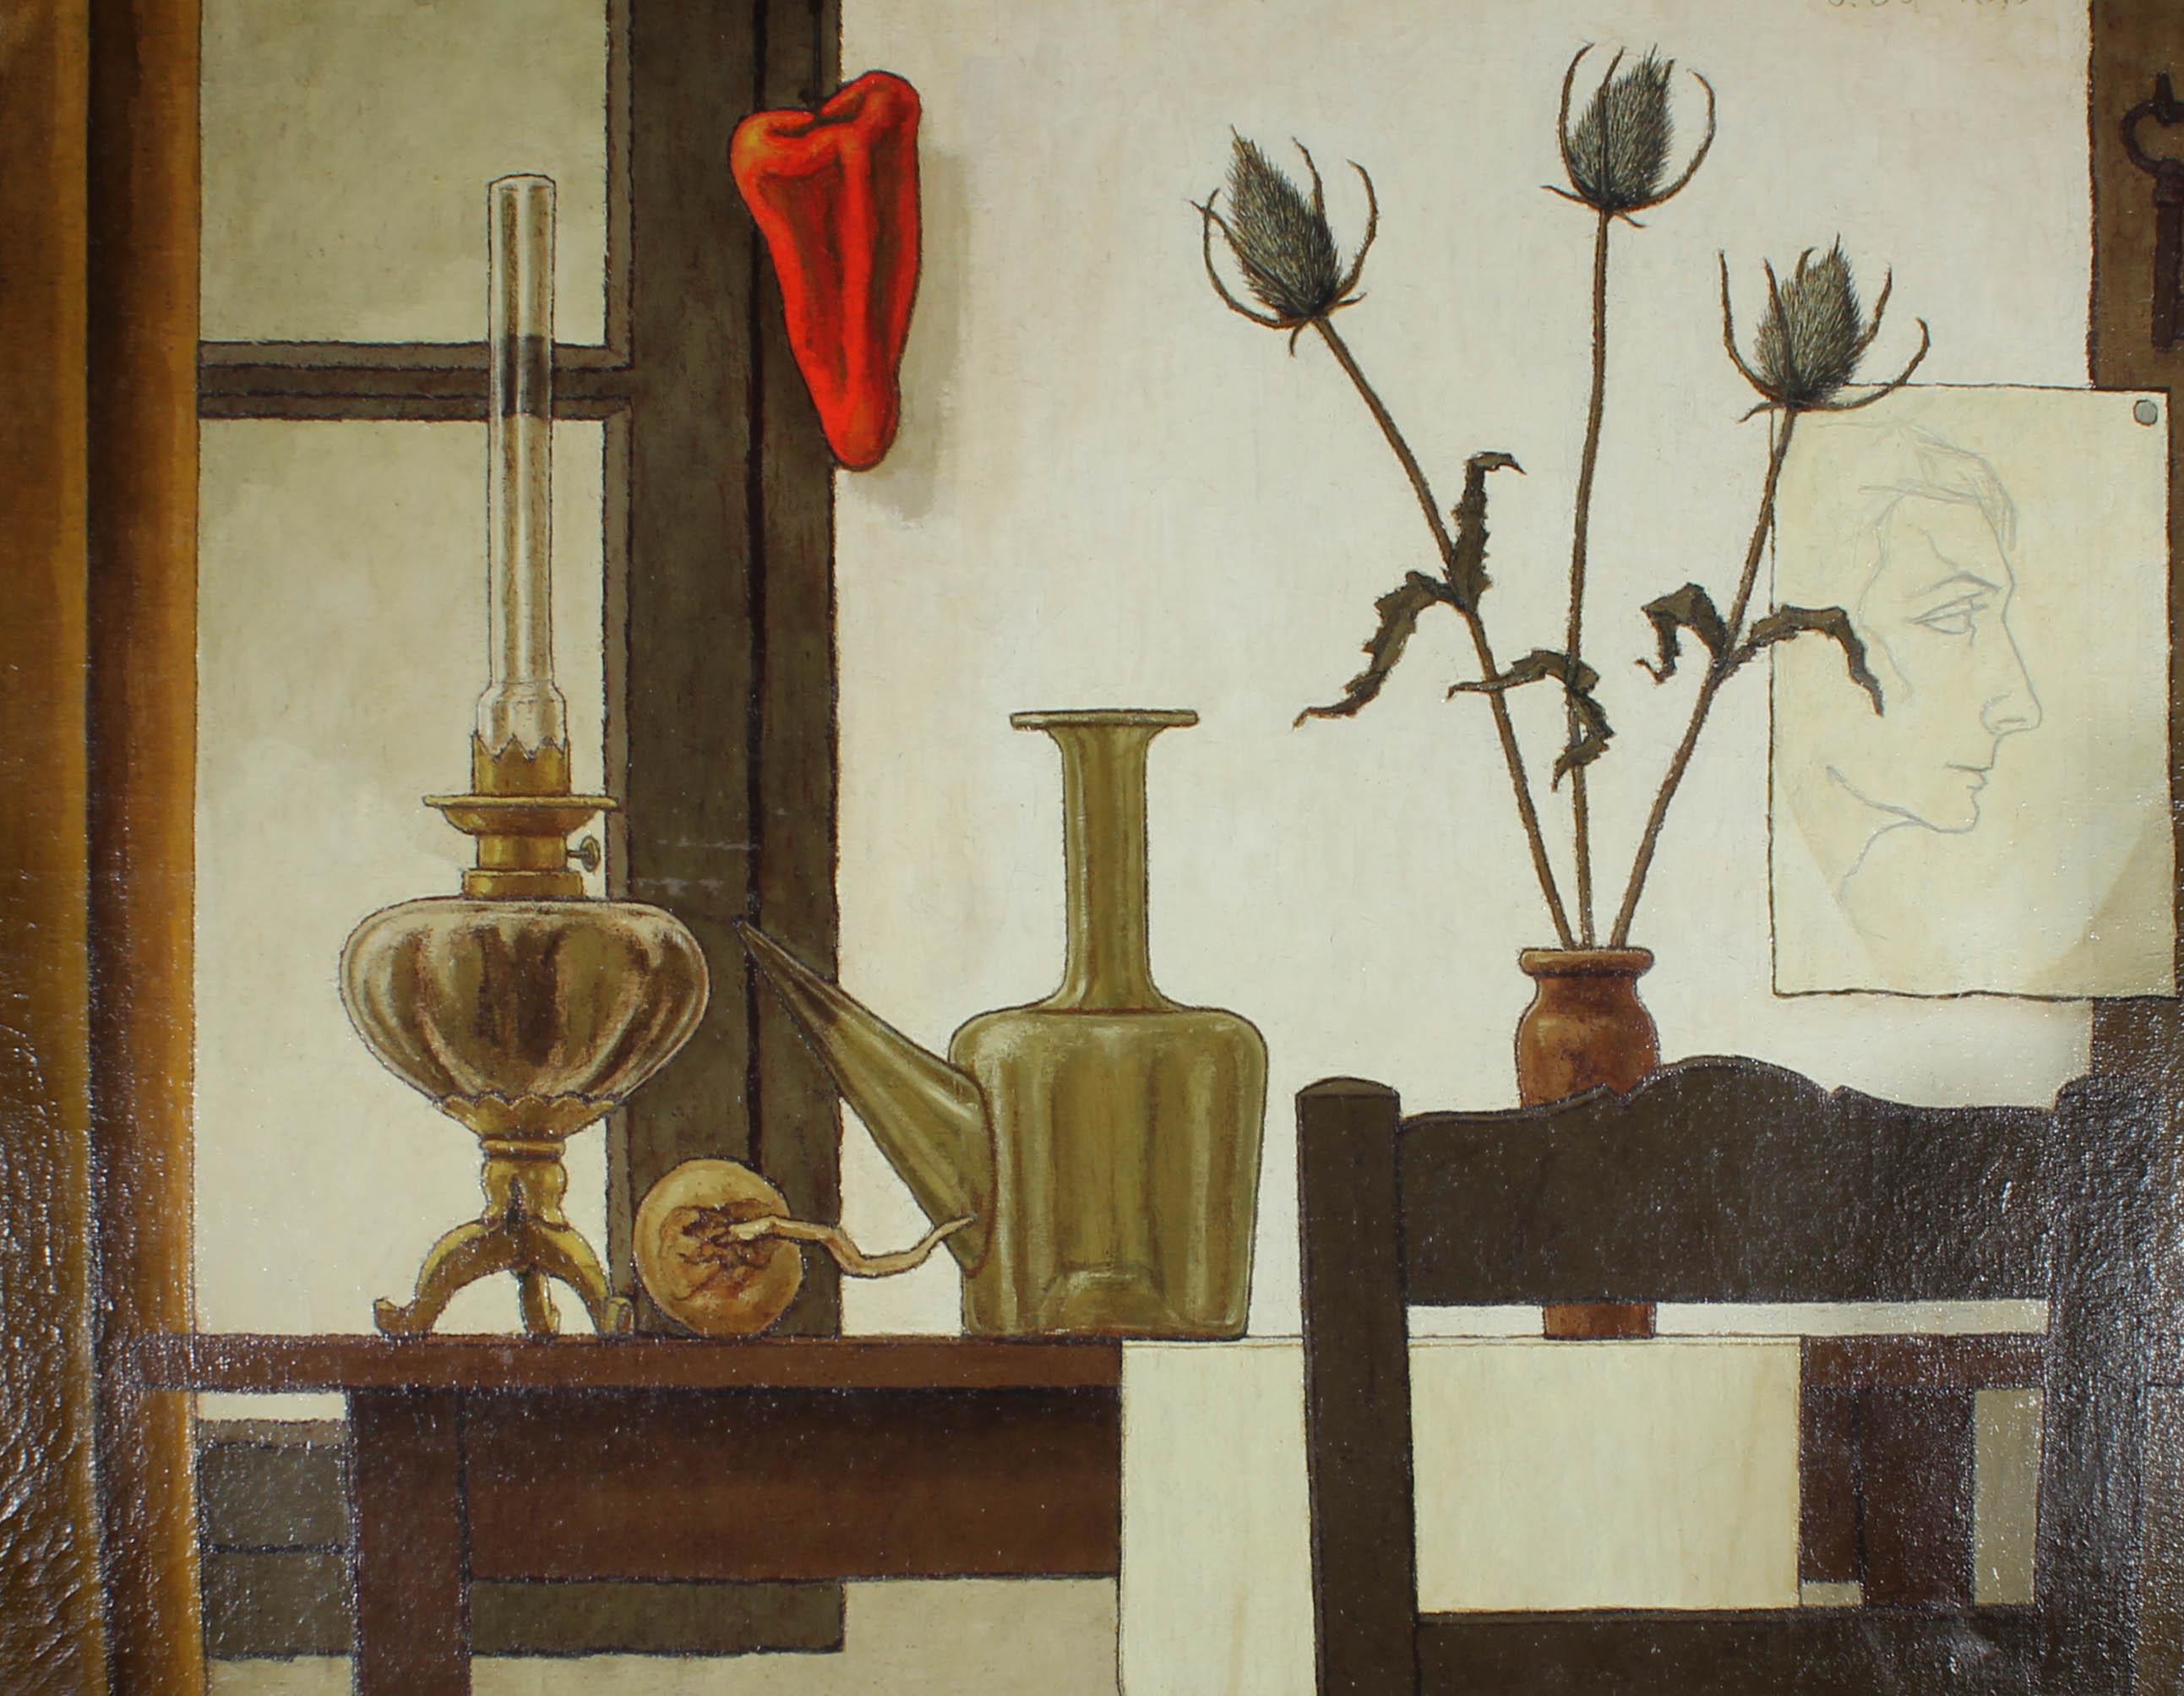 A striking 20th Century still life in an unusual style, showing an interior still life with dried thistles, a red pepper, a sketched portrait, oil lamp and a porró. The artist has signed and dated to the upper right corner and the painting has been